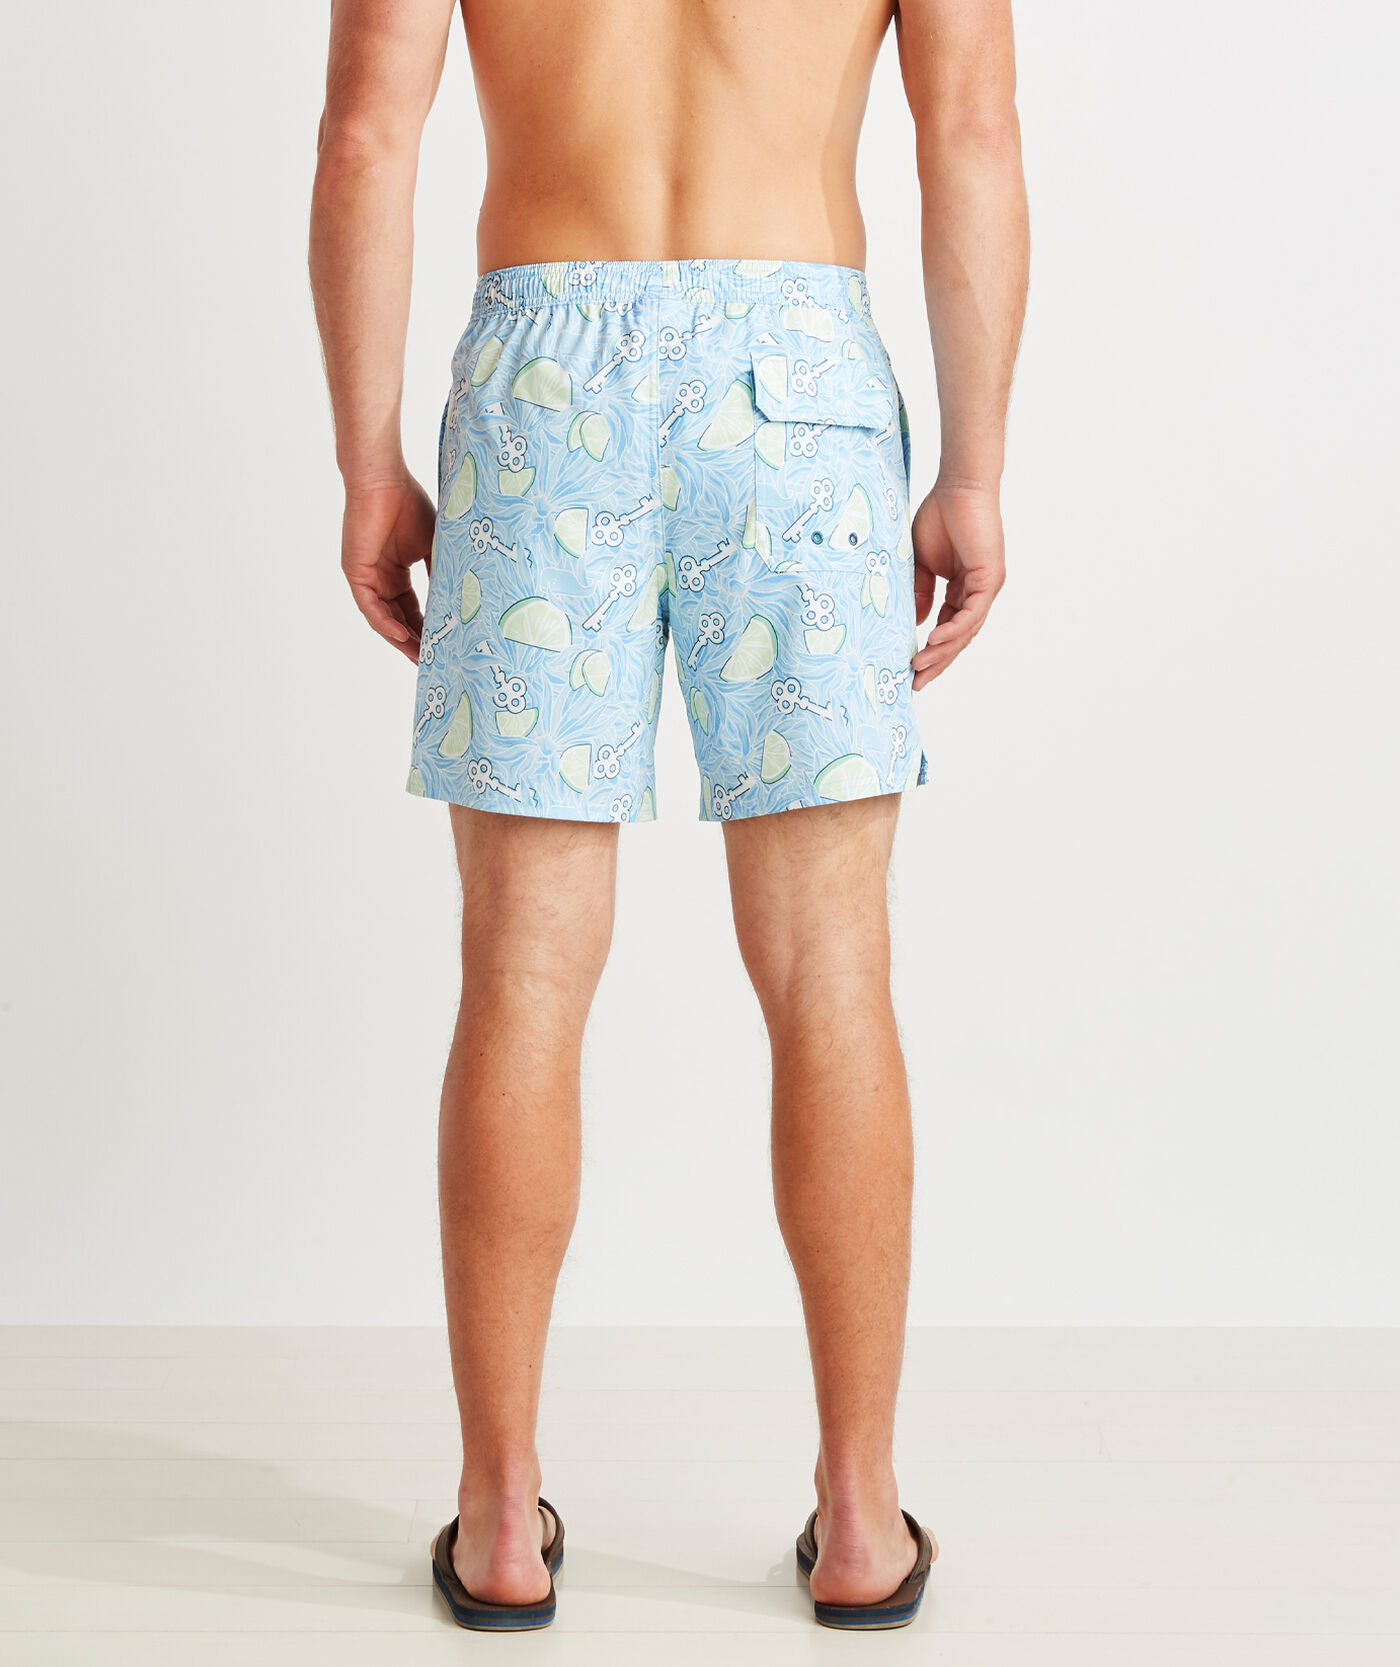 Shop 7 Inch Chappy Trunk at vineyard vines